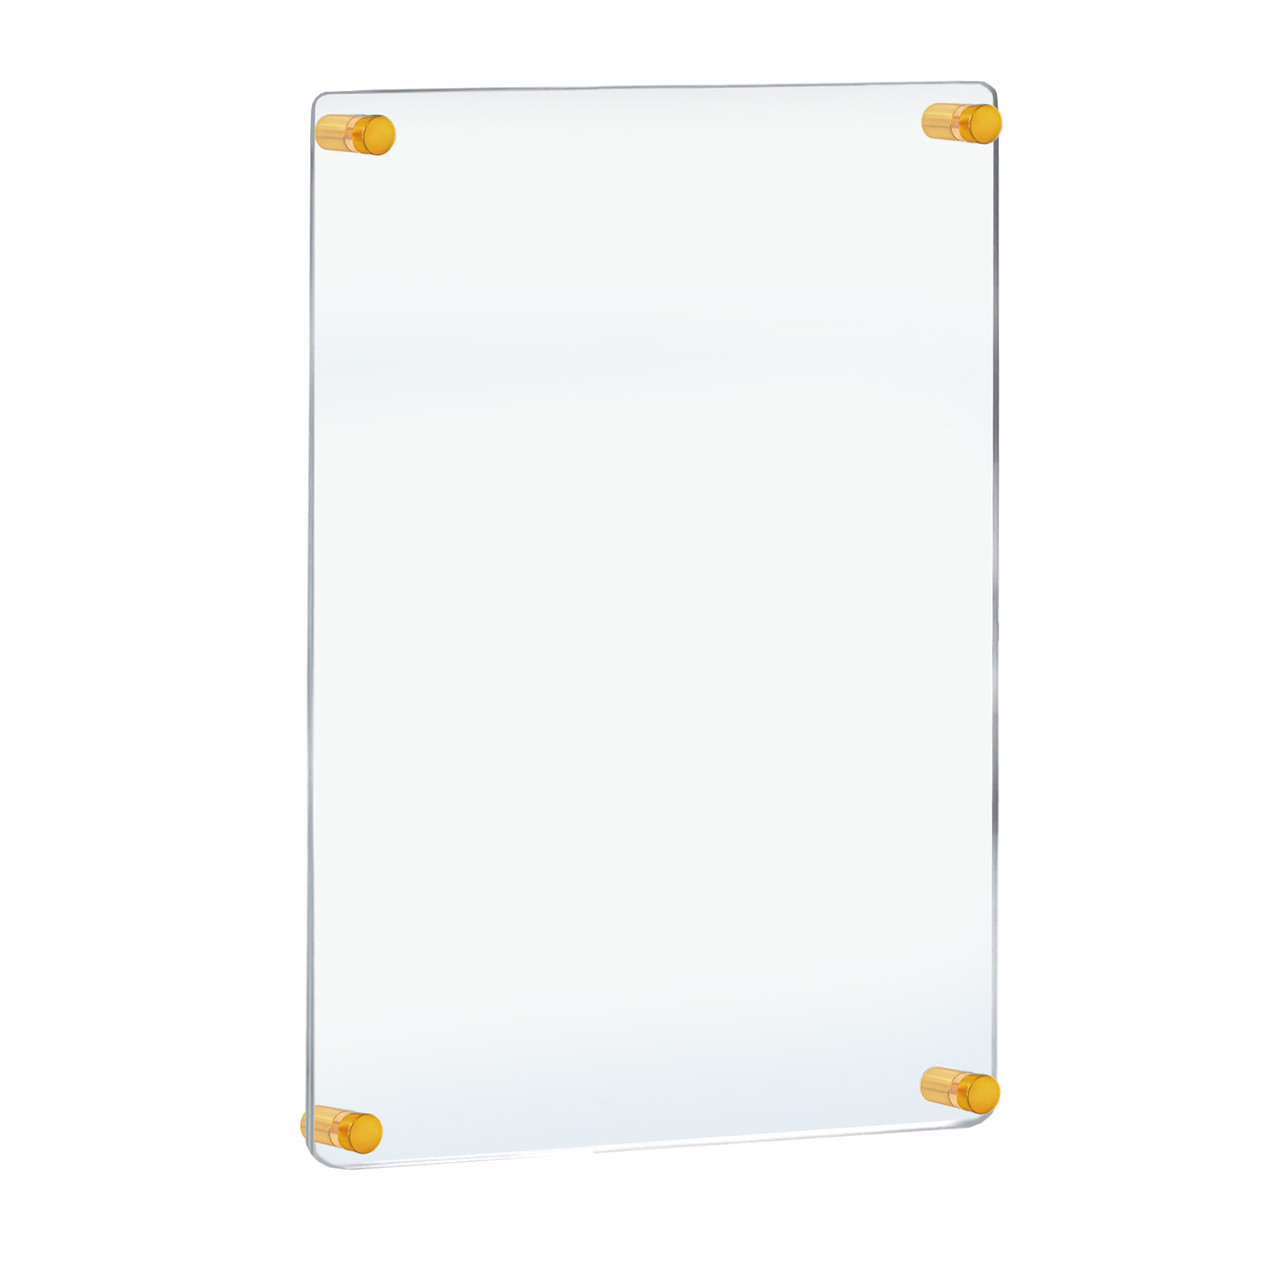 Floating Styrene Wall Frame with Rounded Edges, Gold Stand Off Caps: 22